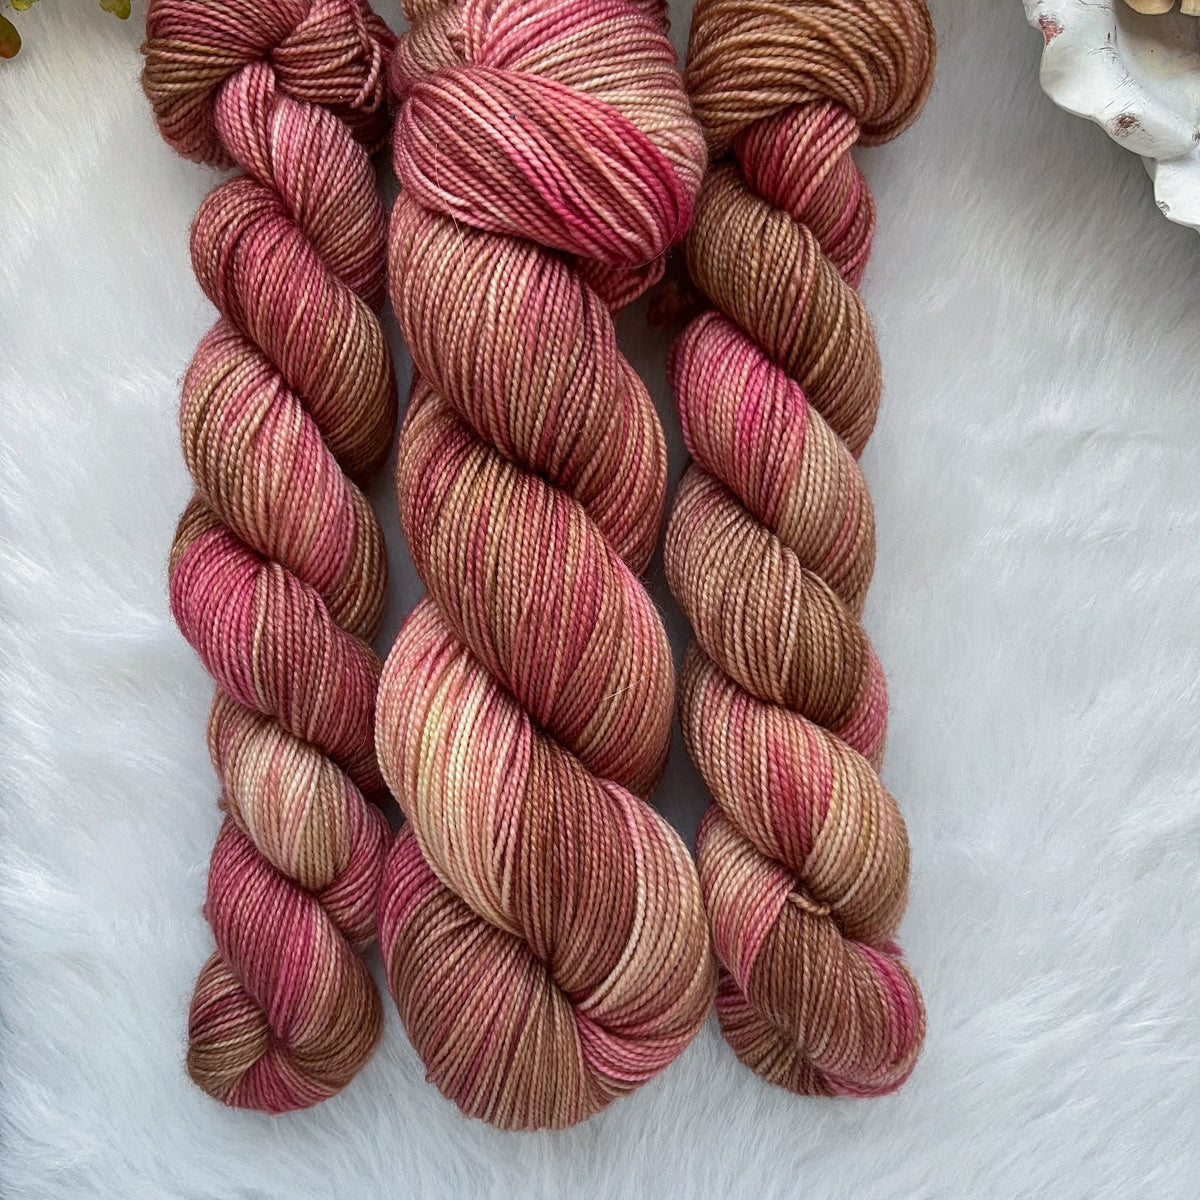 JEREMY FISHER  -Dyed to Order - Hand Dyed Yarn Skein